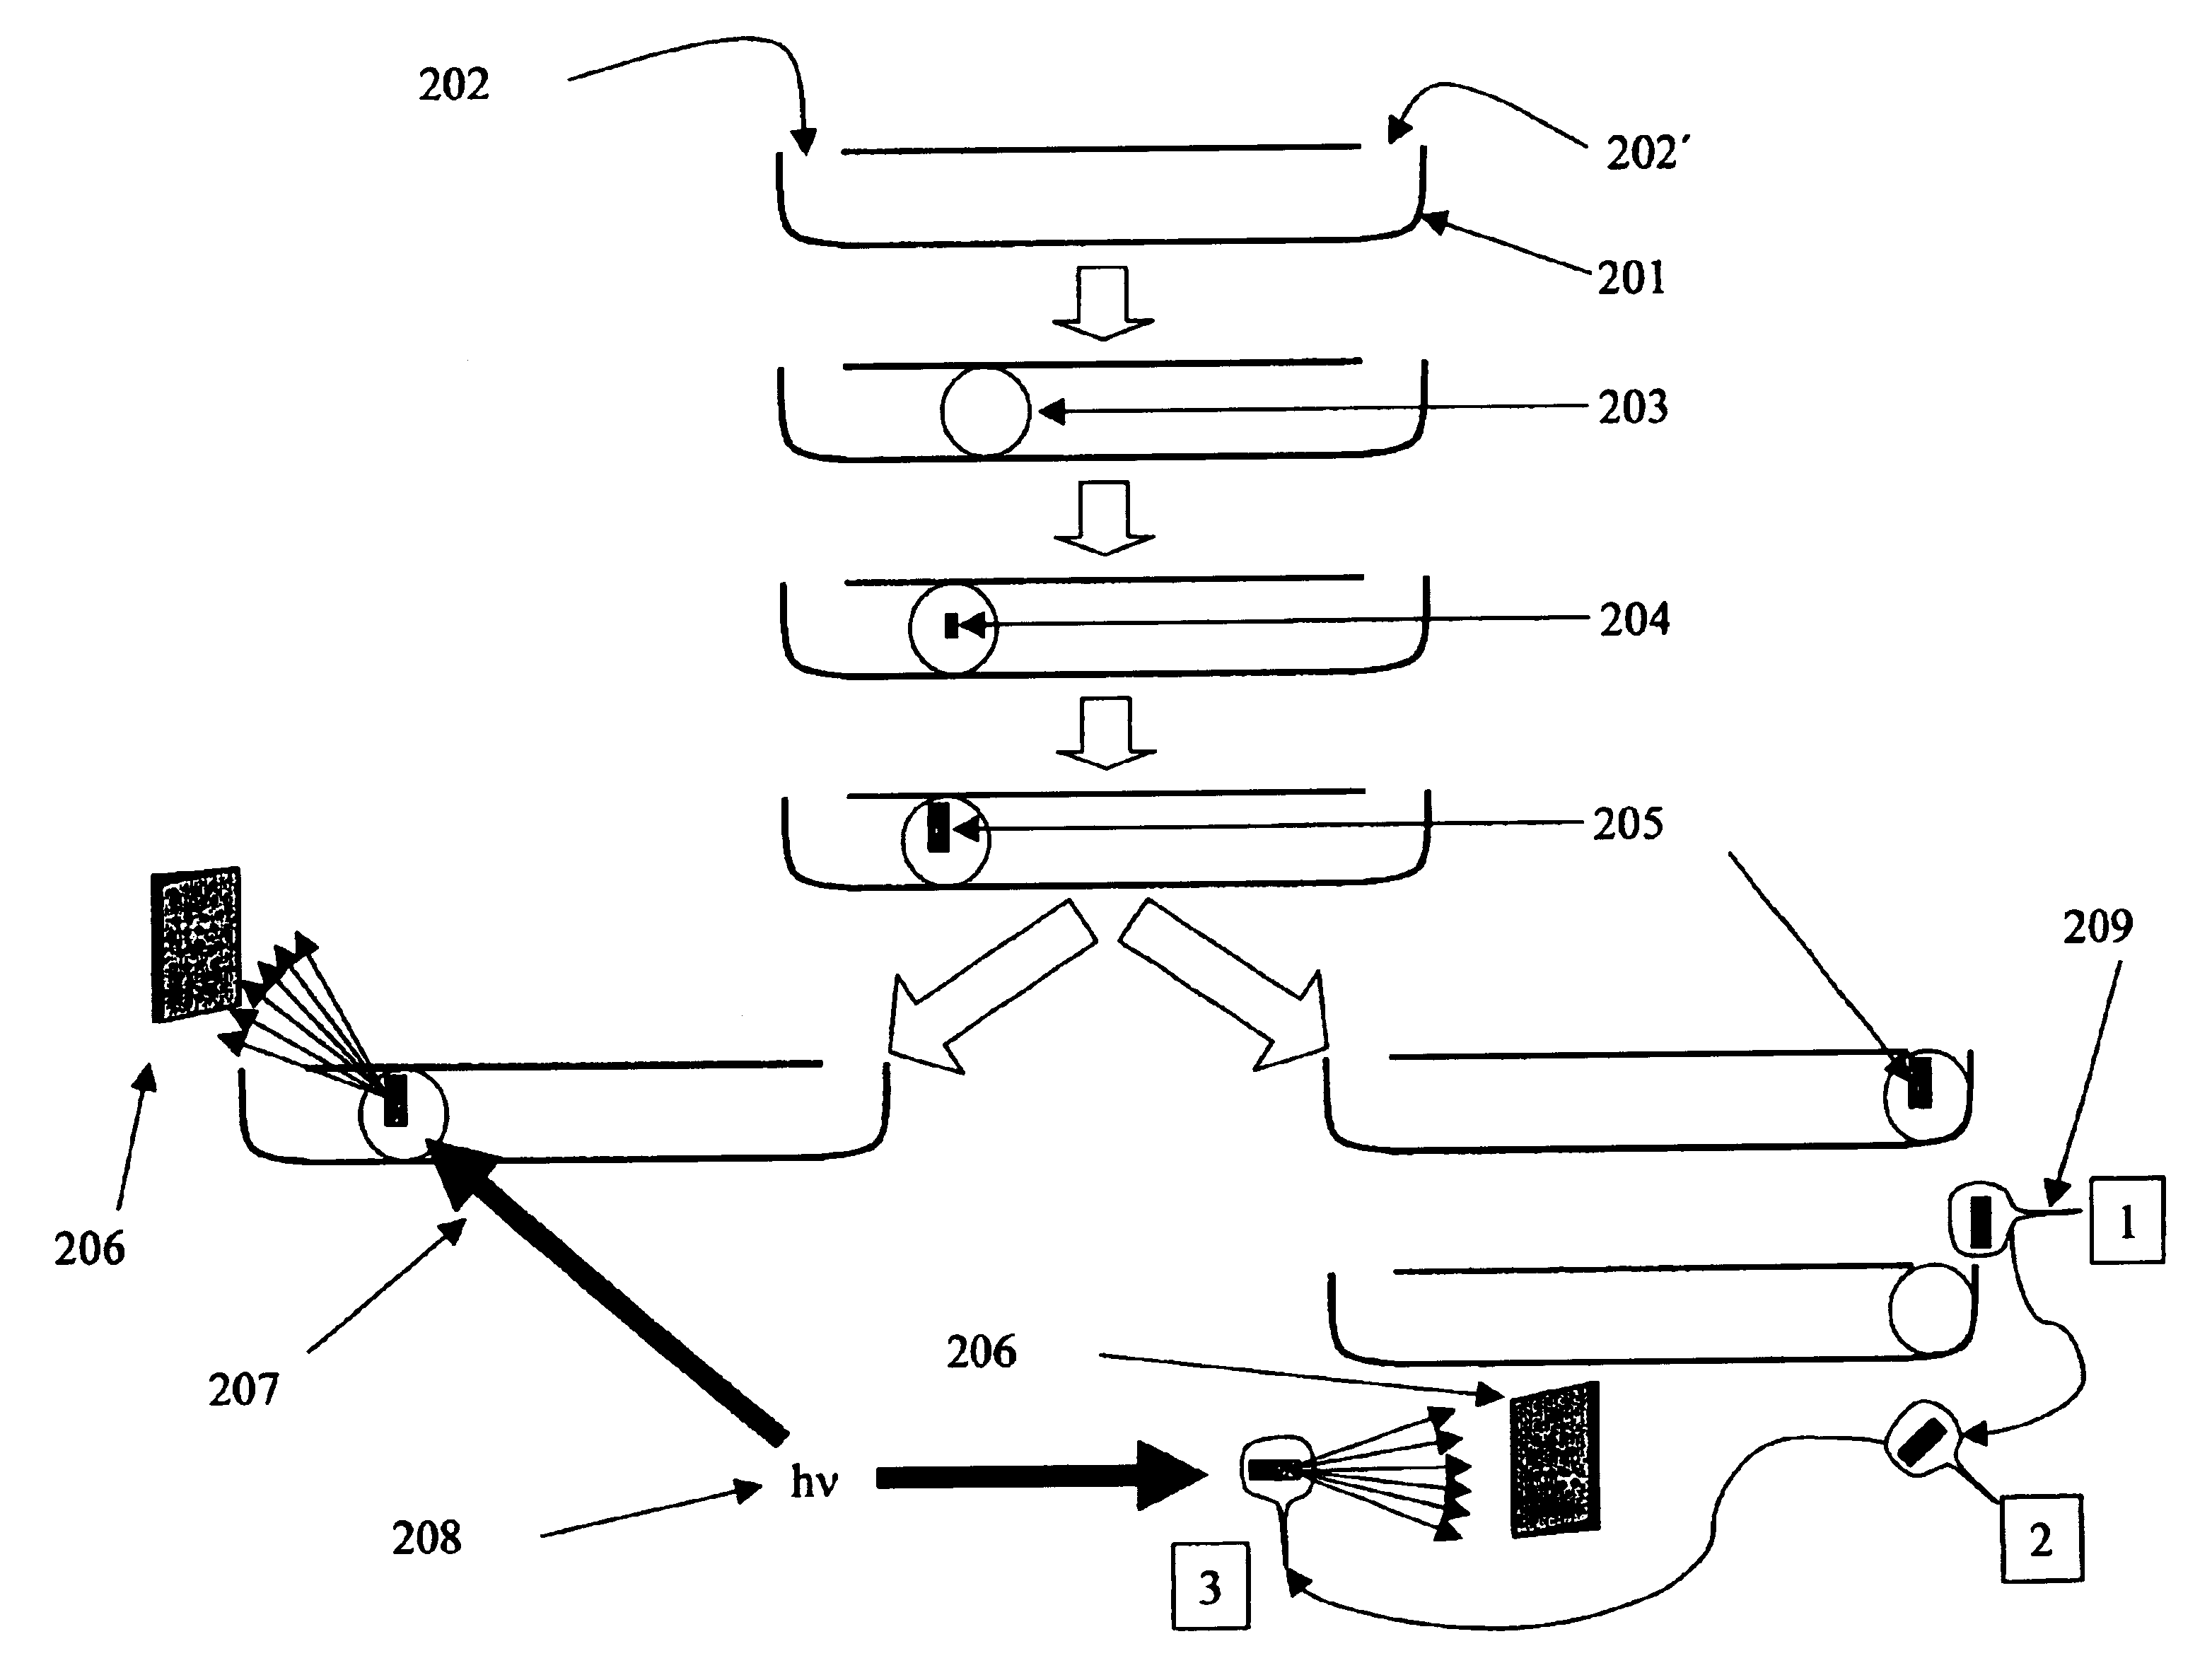 Microfluidic device for parallel delivery and mixing of fluids